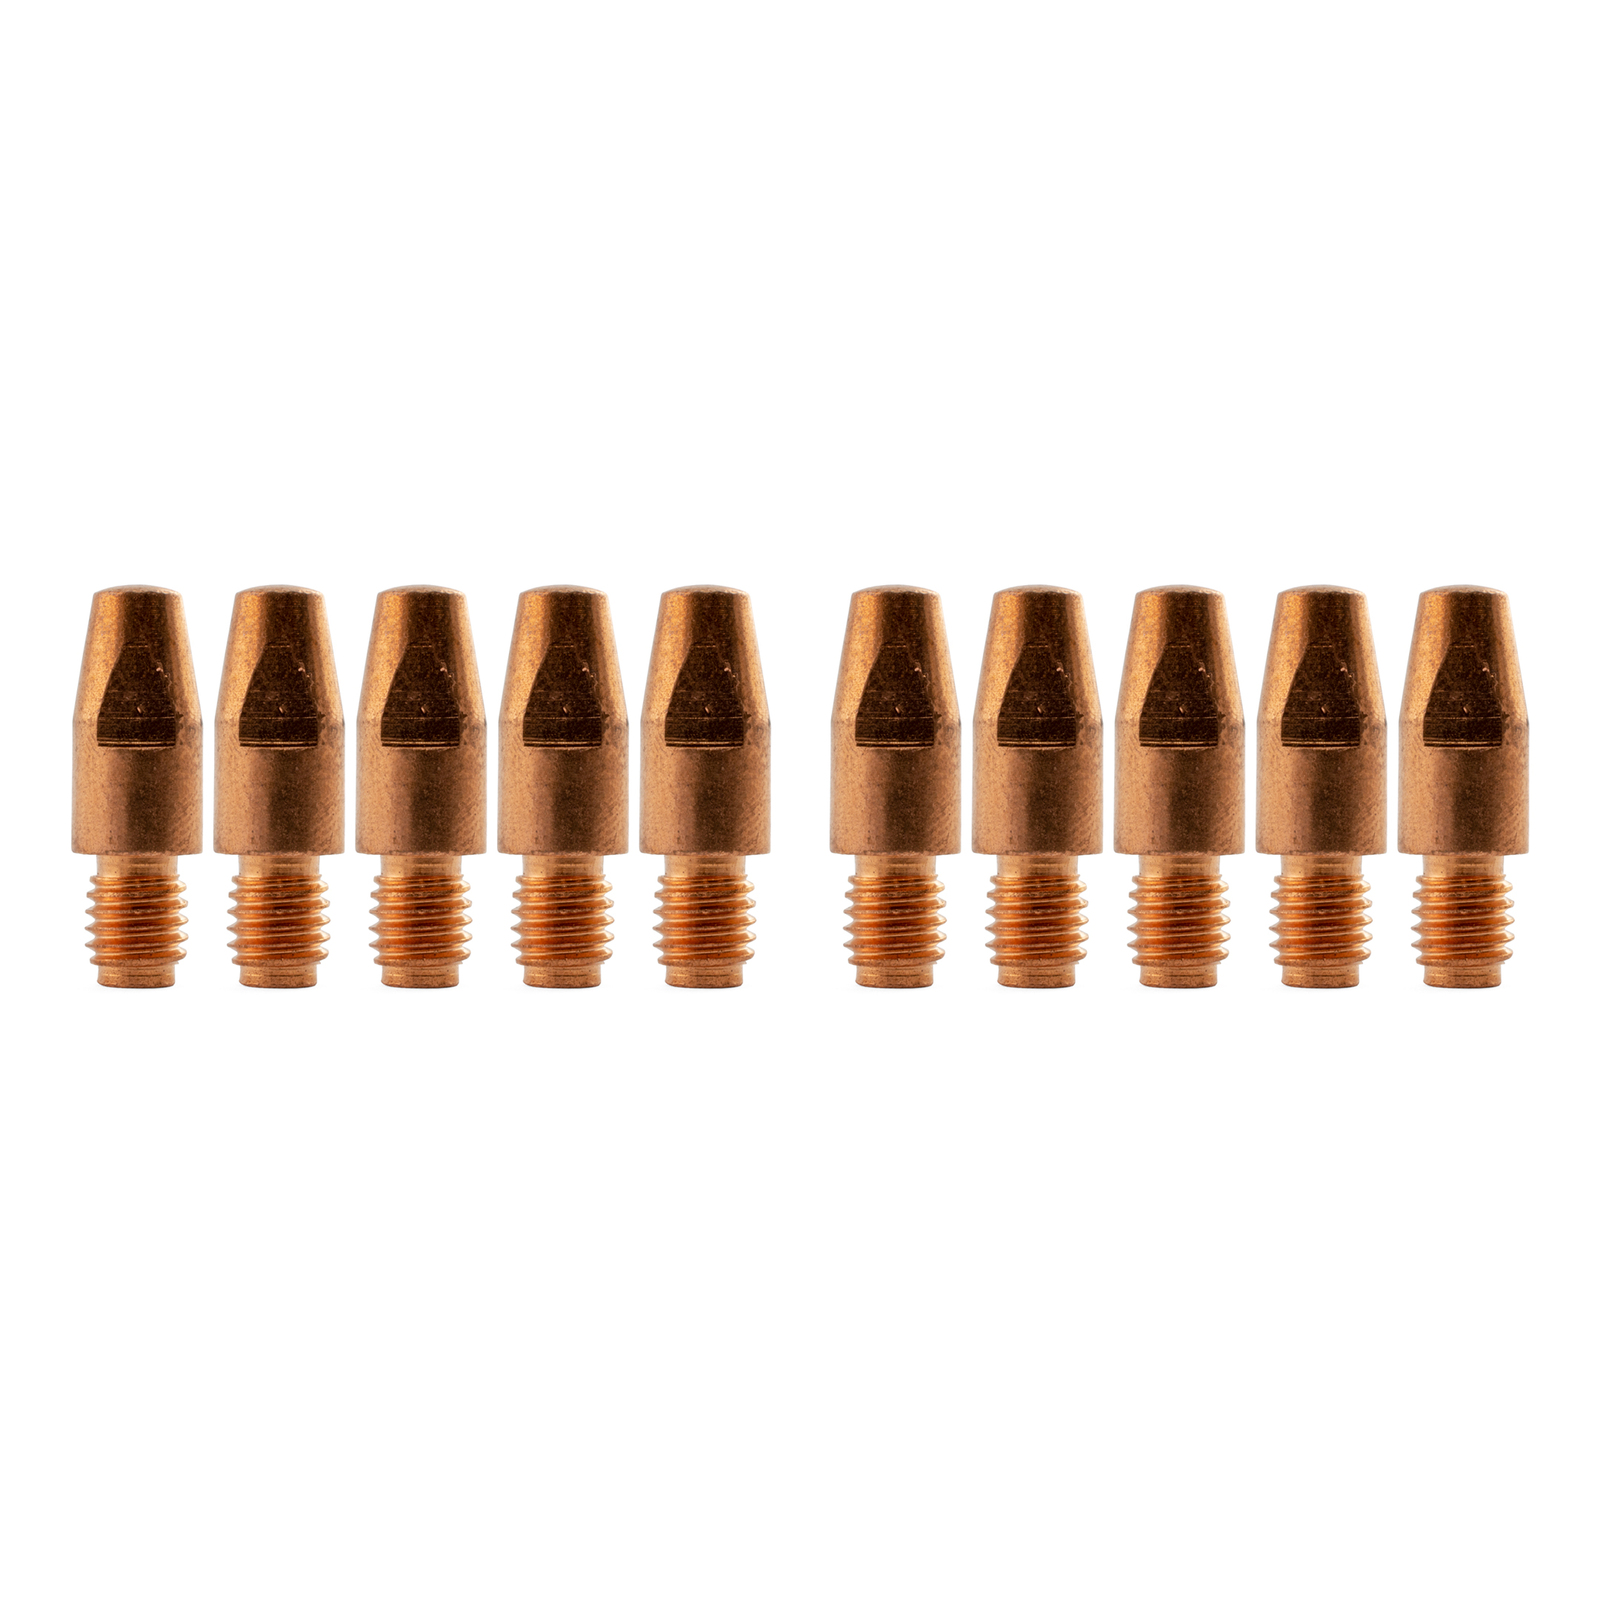 Binzel Style MIG Contact Tips for ALUMINIUM 1.2mm - 10 pack - M8 x 10mm x 1.2mm